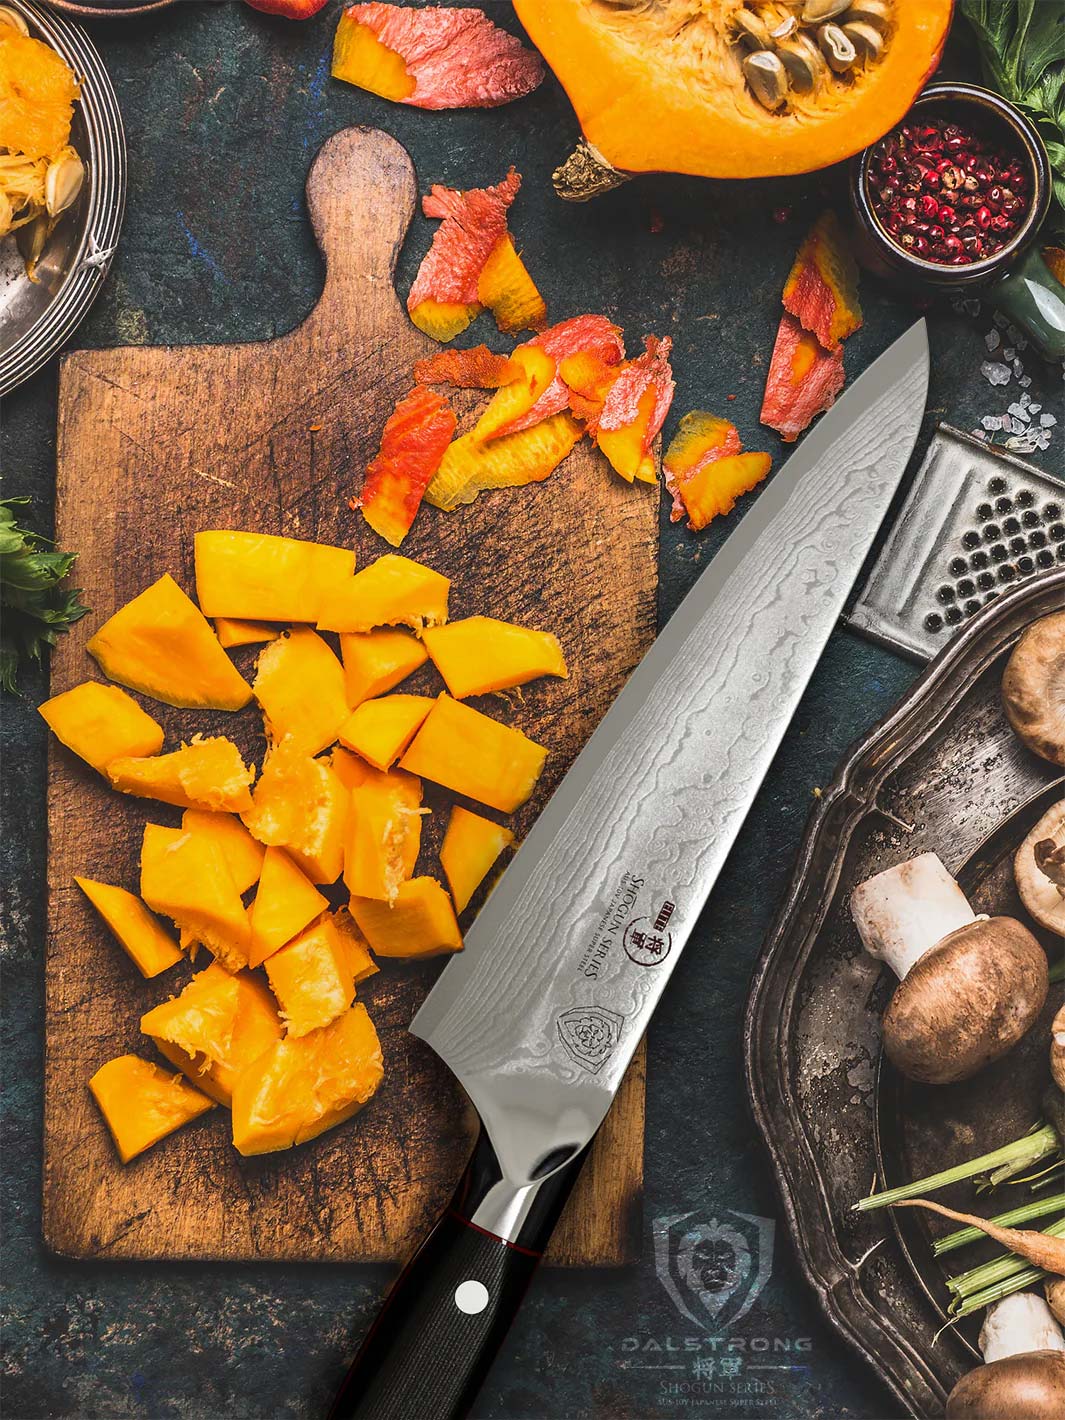 Dalstrong shogun series 7 inch chef knife with cuts of squash on a wooden board.